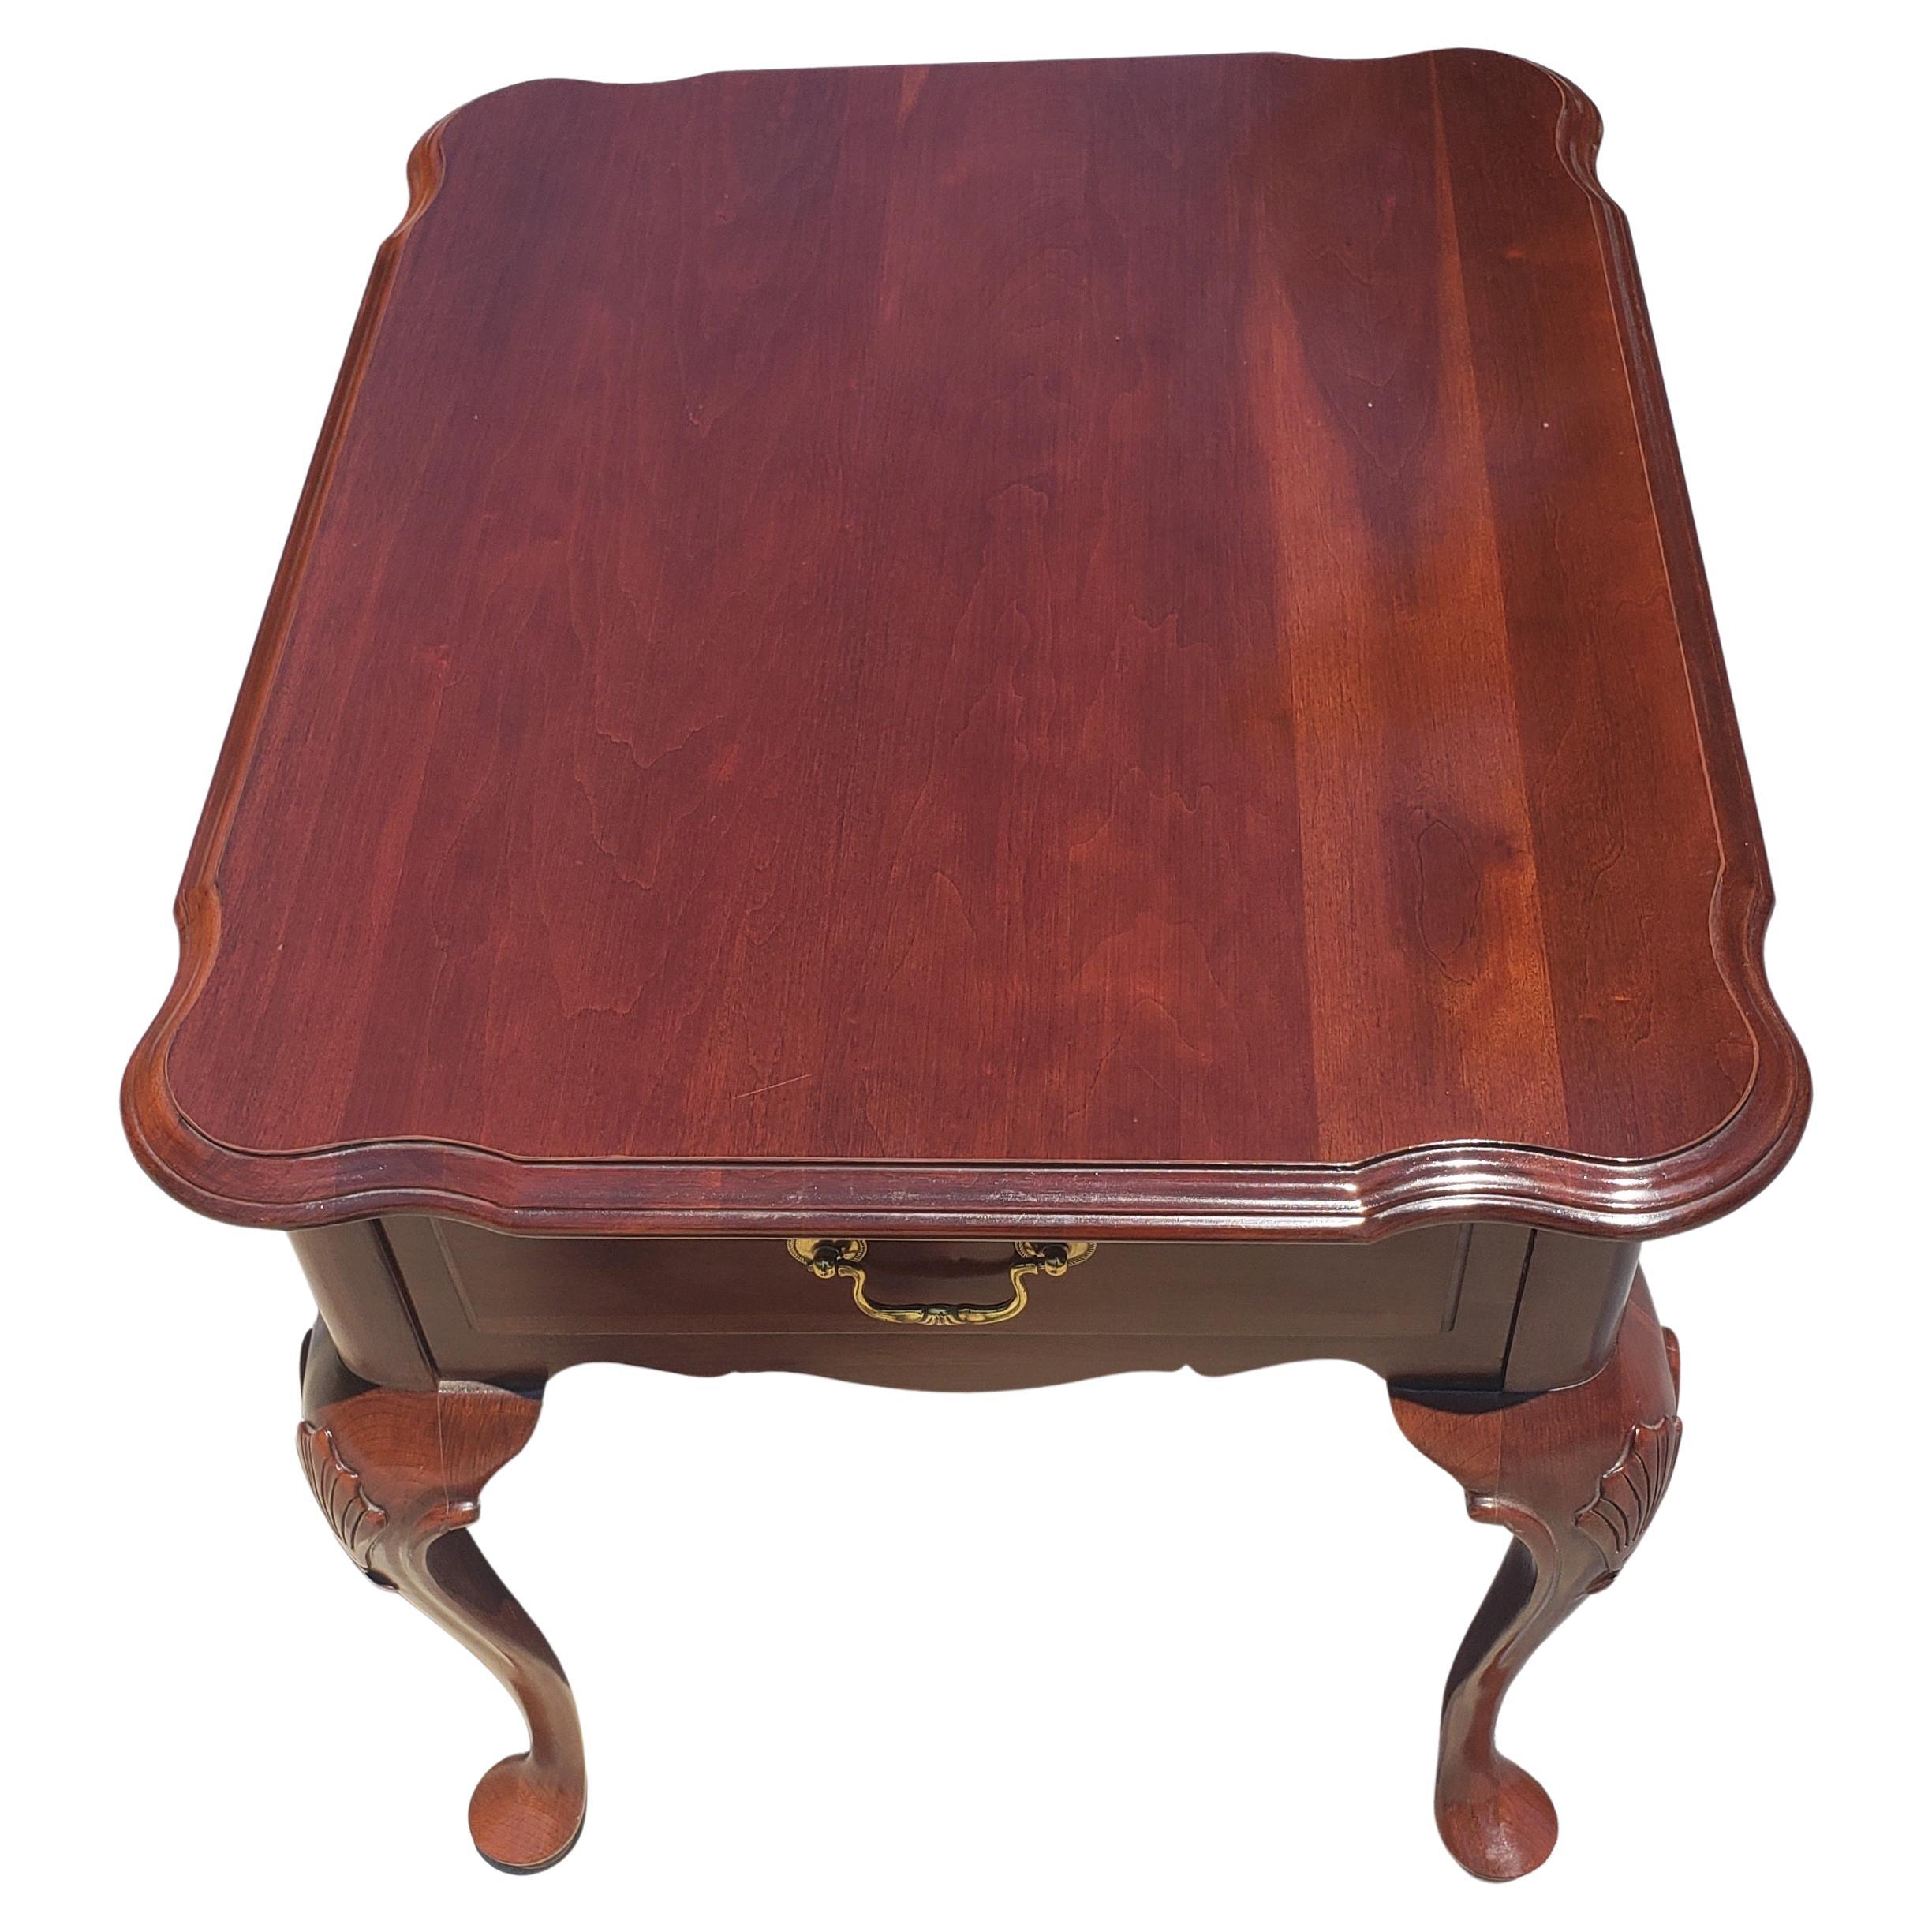 A beautiful Ethan Allen Georgian Court Queen Anne style cherry side table in very good vintage condition. 
Cabriole legs with carvings and terminating queen Anne pad feet. Very Minor signs of use.
Measures 20.5 inches in width, 26.5 inches in